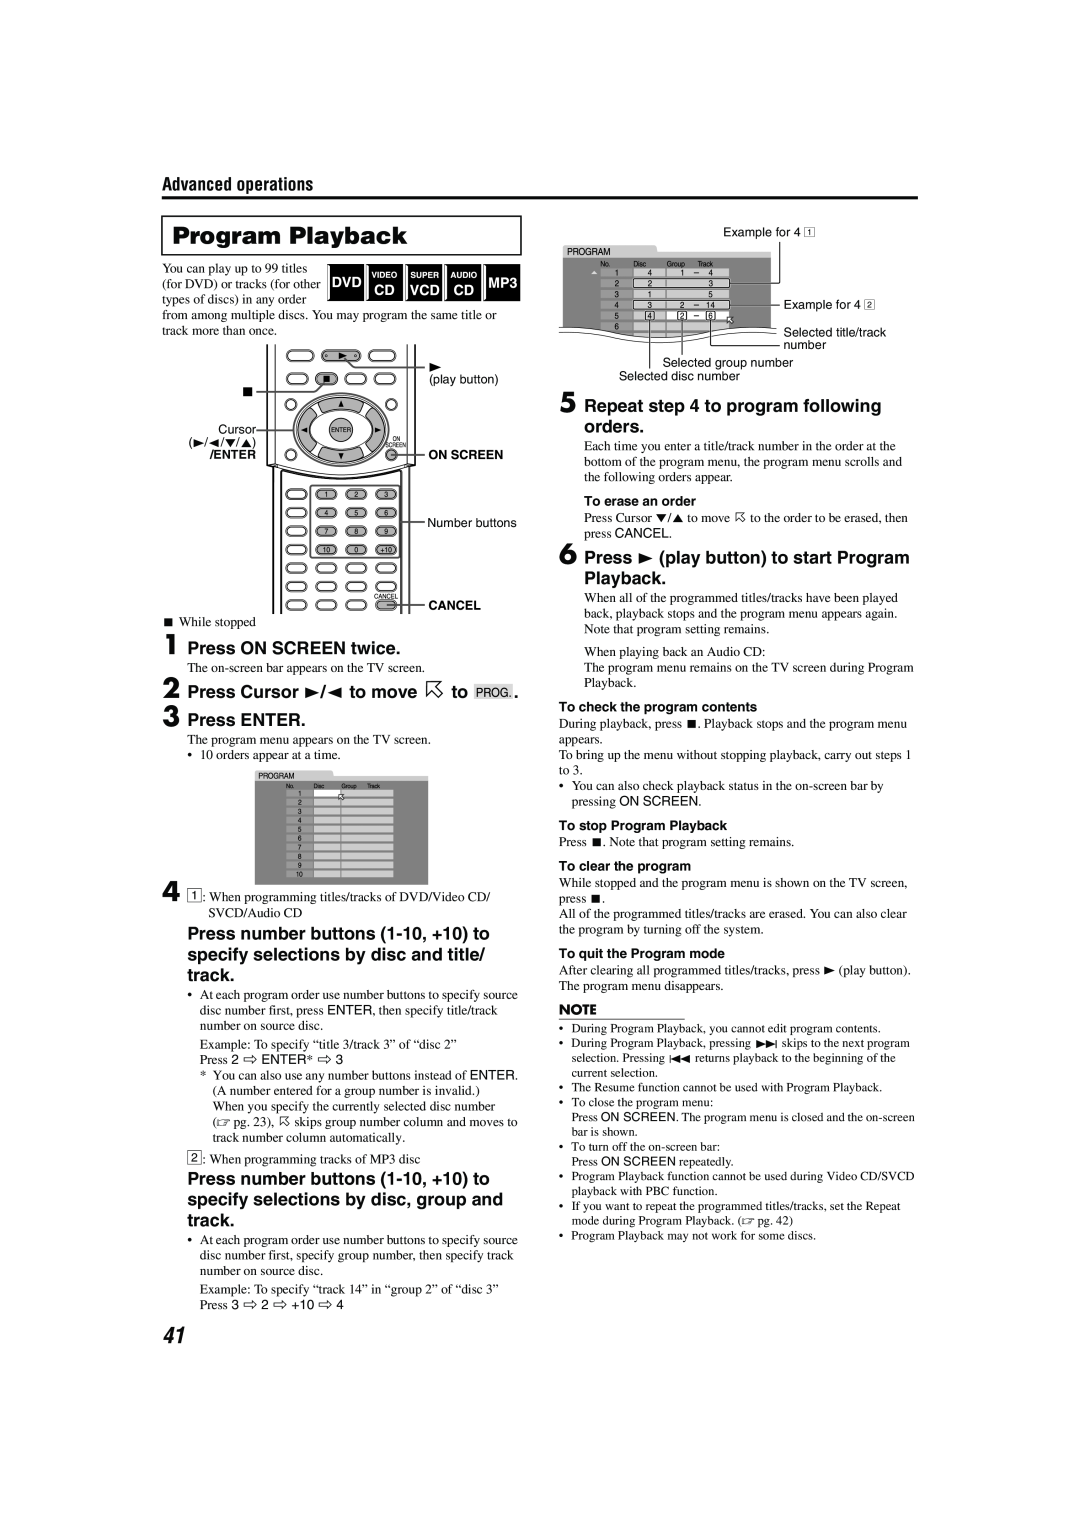 JVC TH-M42 manual Program Playback, Press Cursor !/ to move 0 to . 3 Press ENTER, Repeat to program following orders 